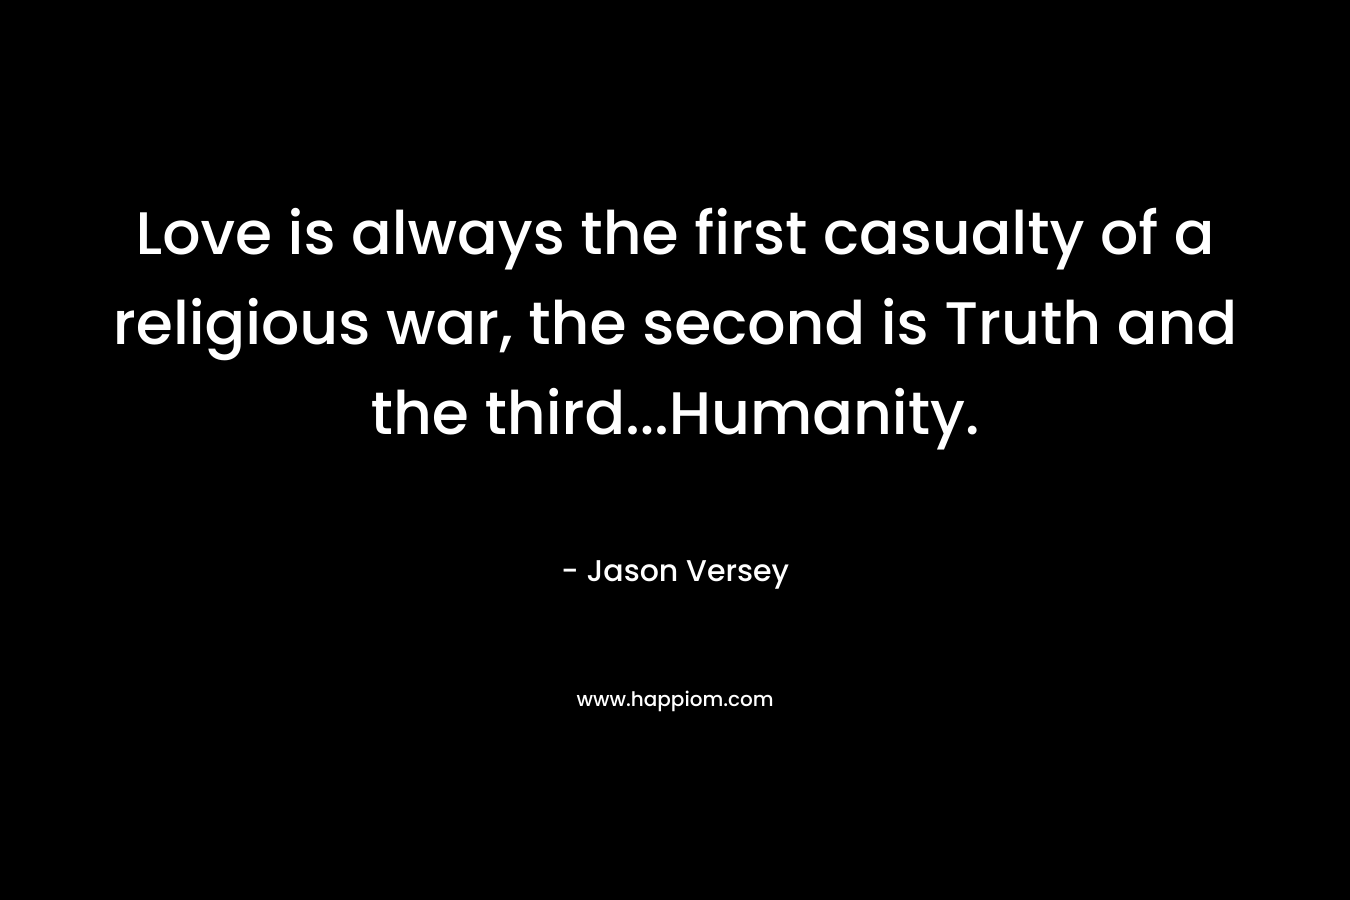 Love is always the first casualty of a religious war, the second is Truth and the third...Humanity.